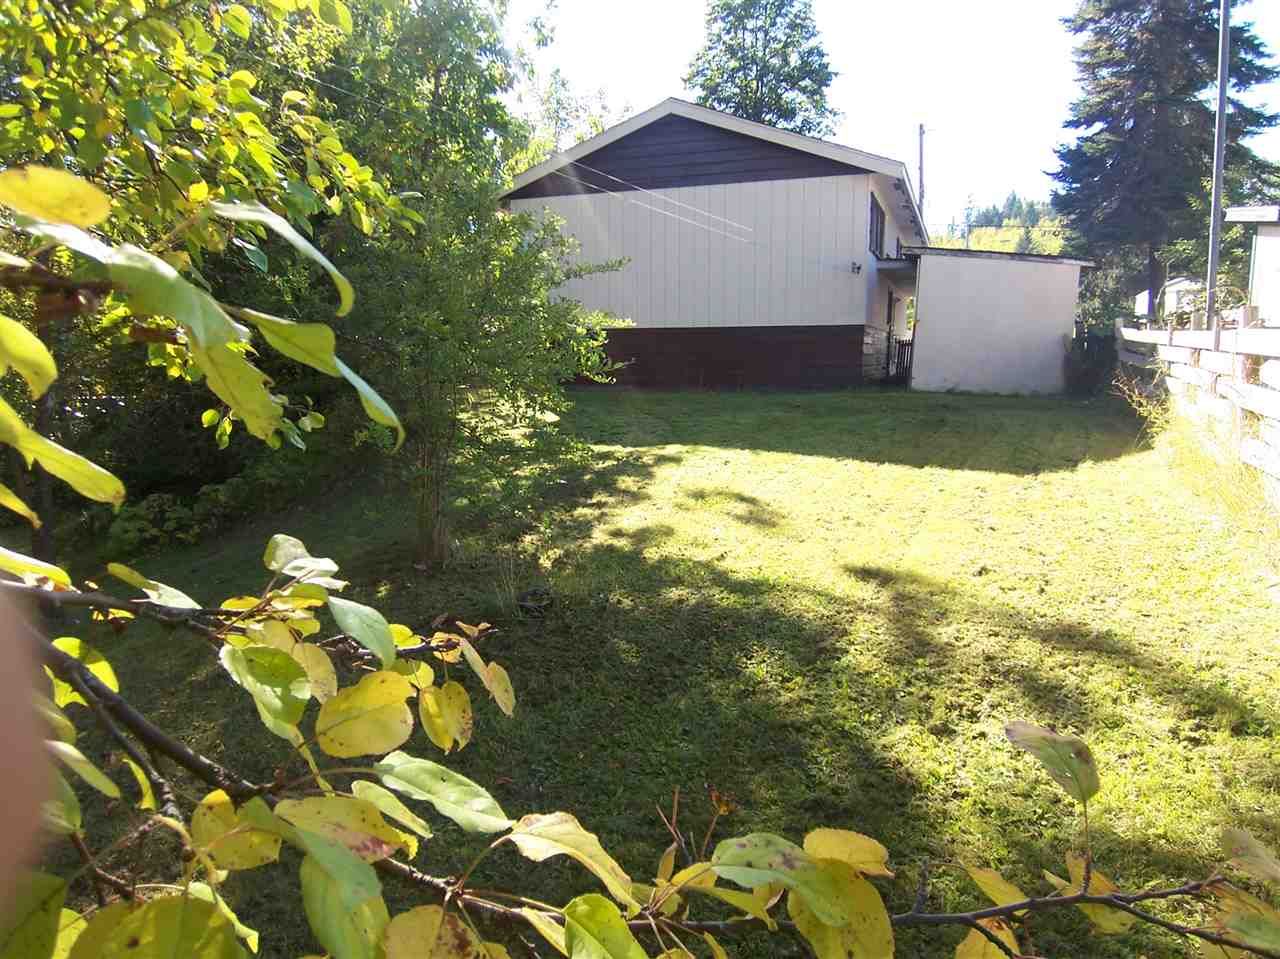 Photo 3: Photos: 731 BEAUBIEN Avenue in Quesnel: Quesnel - Town House for sale (Quesnel (Zone 28))  : MLS®# R2109317